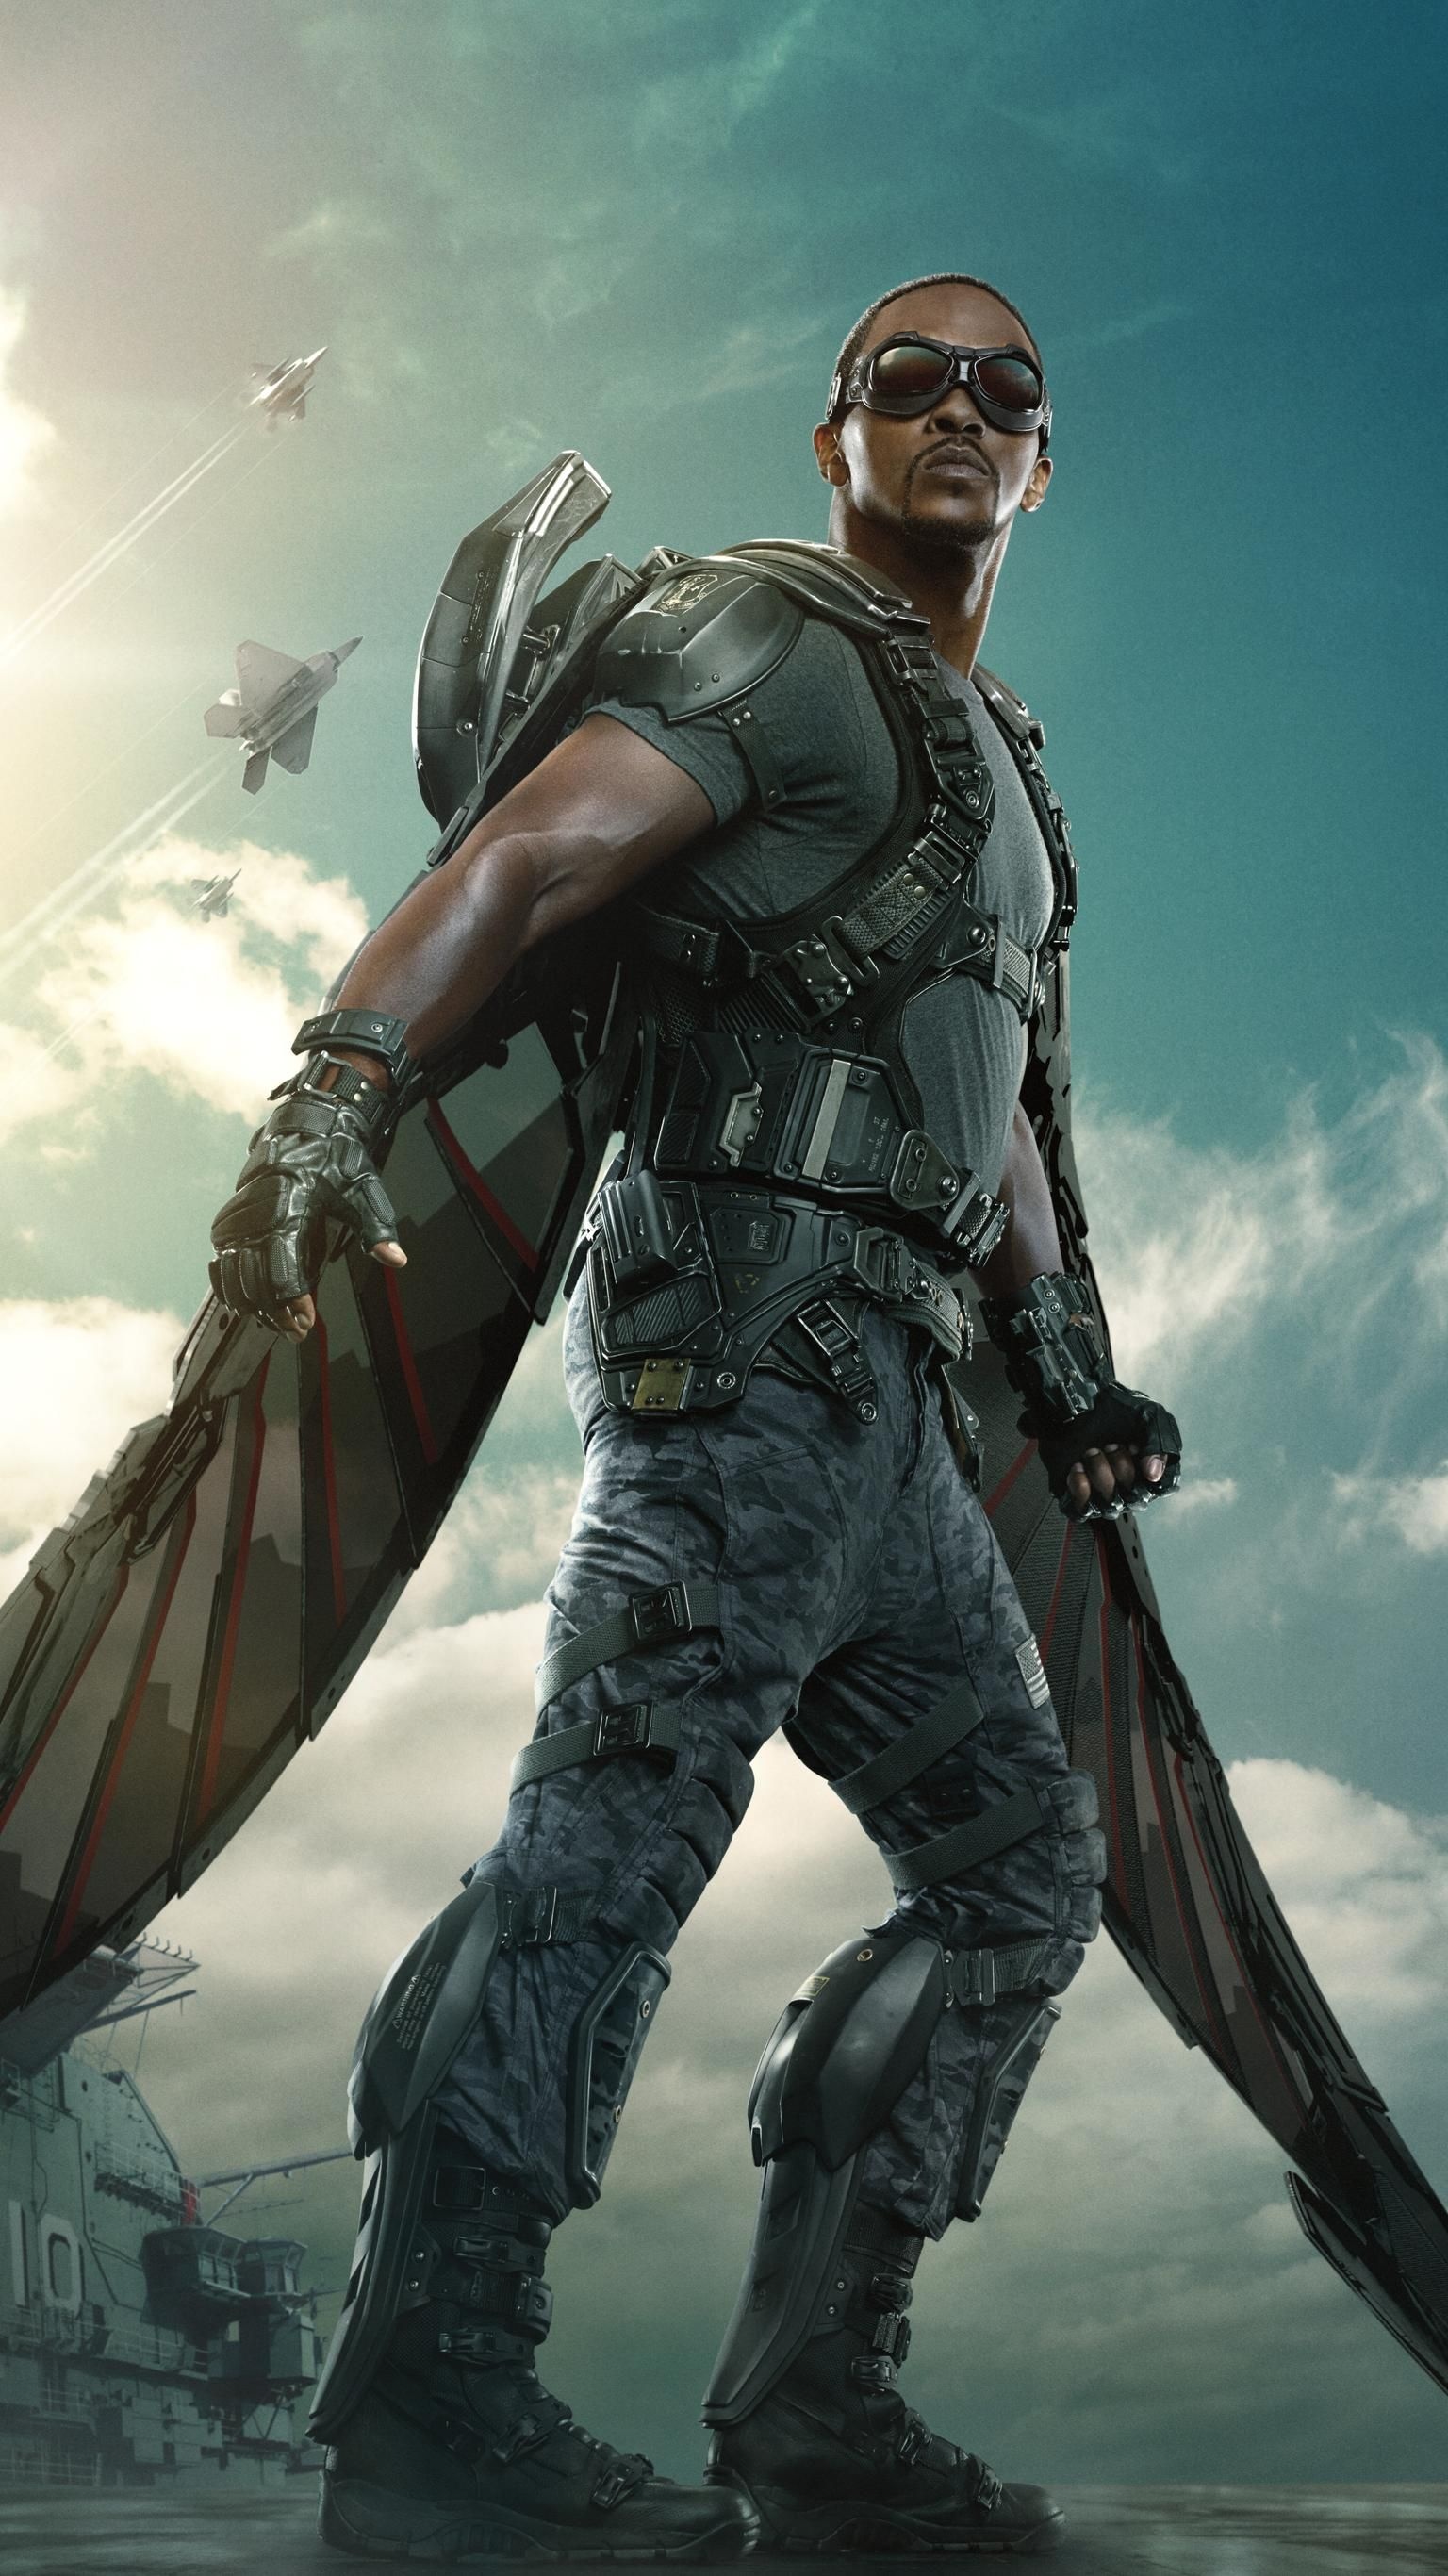 Captain America Winter Soldier, Phone wallpaper, Movie character posters, 1540x2740 HD Handy